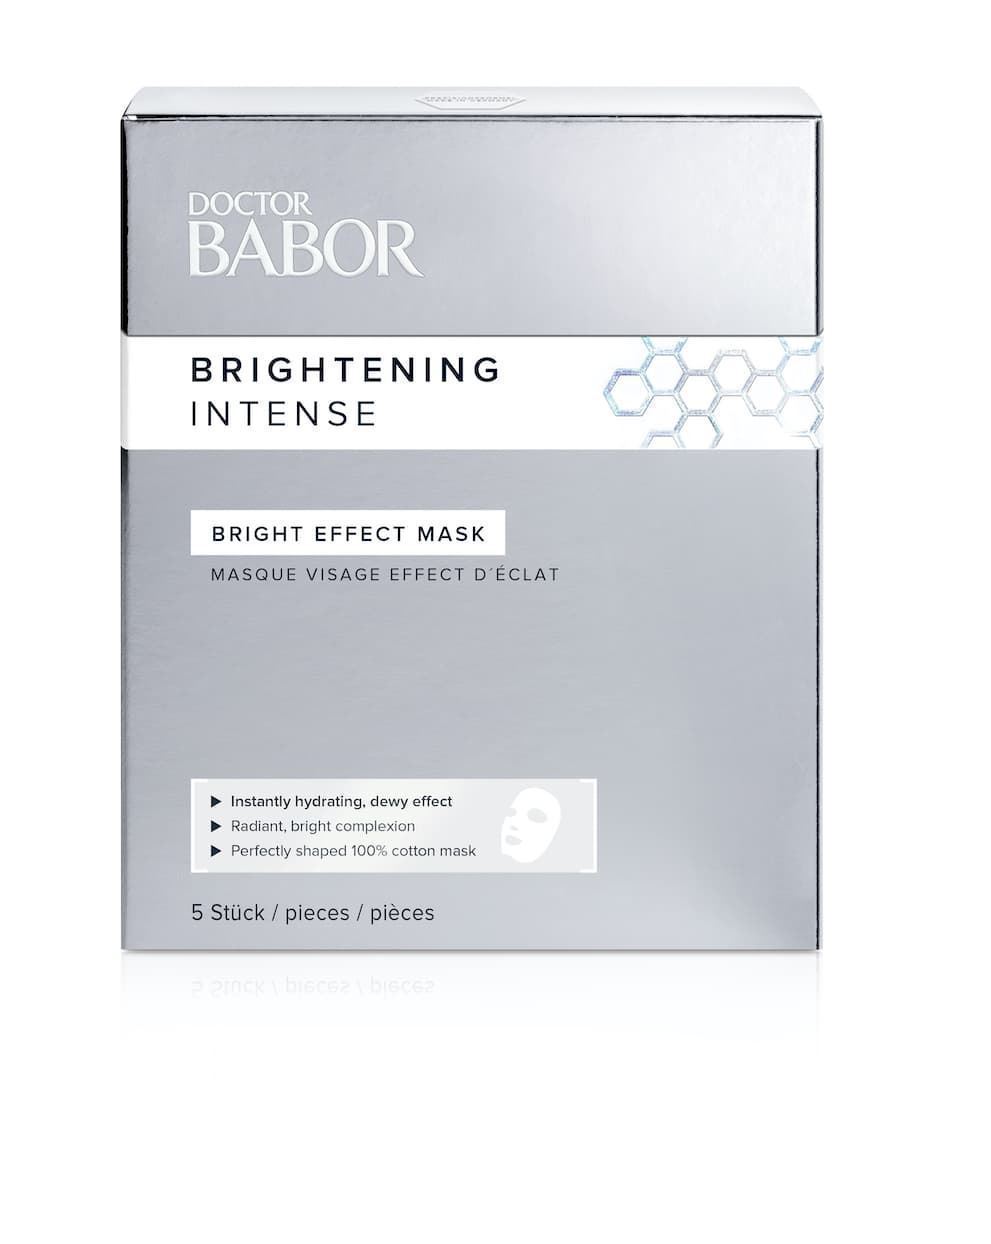 DOCTOR BABOR DAILY BRIGHT EFFECT MASK - Imagen 1